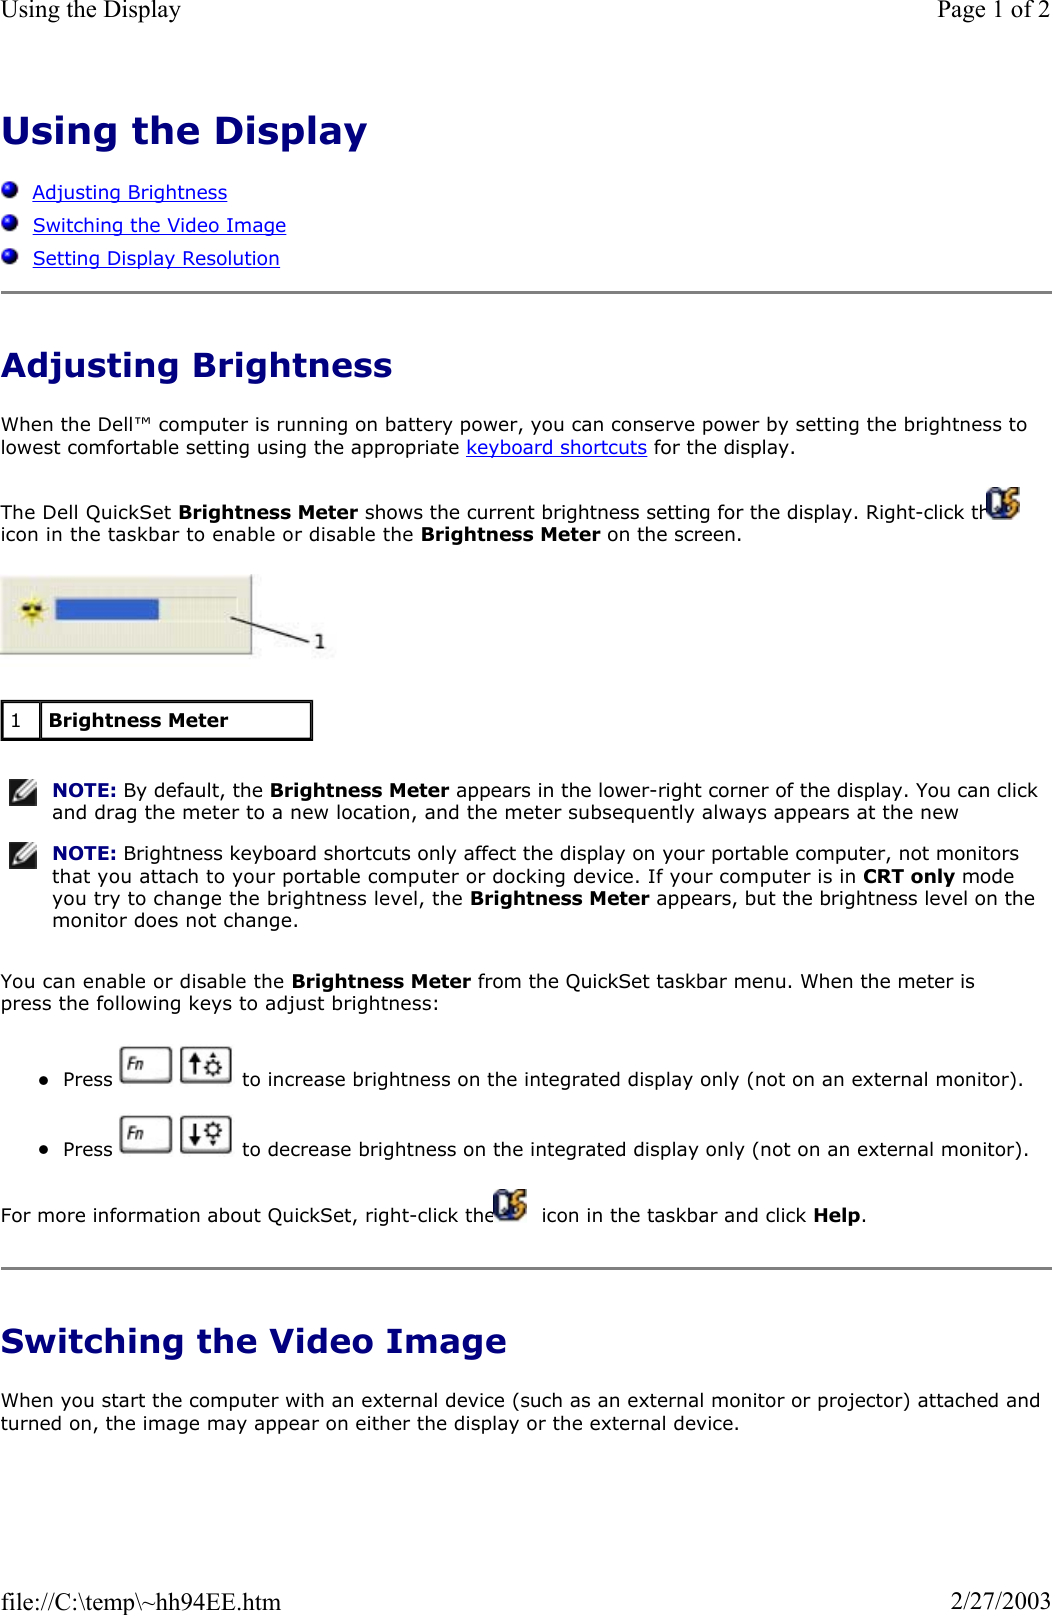 Using the DisplayAdjusting BrightnessSwitching the Video ImageSetting Display ResolutionAdjusting Brightness When the Dell™ computer is running on battery power, you can conserve power by setting the brightness to lowest comfortable setting using the appropriate keyboard shortcuts for the display. The Dell QuickSet Brightness Meter shows the current brightness setting for the display. Right-click the   icon in the taskbar to enable or disable the Brightness Meter on the screen. You can enable or disable the Brightness Meter from the QuickSet taskbar menu. When the meter is press the following keys to adjust brightness: zPress     to increase brightness on the integrated display only (not on an external monitor). zPress     to decrease brightness on the integrated display only (not on an external monitor). For more information about QuickSet, right-click the   icon in the taskbar and click Help.Switching the Video Image When you start the computer with an external device (such as an external monitor or projector) attached and turned on, the image may appear on either the display or the external device. 1Brightness MeterNOTE: By default, the Brightness Meter appears in the lower-right corner of the display. You can click and drag the meter to a new location, and the meter subsequently always appears at the new NOTE: Brightness keyboard shortcuts only affect the display on your portable computer, not monitors that you attach to your portable computer or docking device. If your computer is in CRT only mode you try to change the brightness level, the Brightness Meter appears, but the brightness level on the monitor does not change.Page 1 of 2Using the Display2/27/2003file://C:\temp\~hh94EE.htm